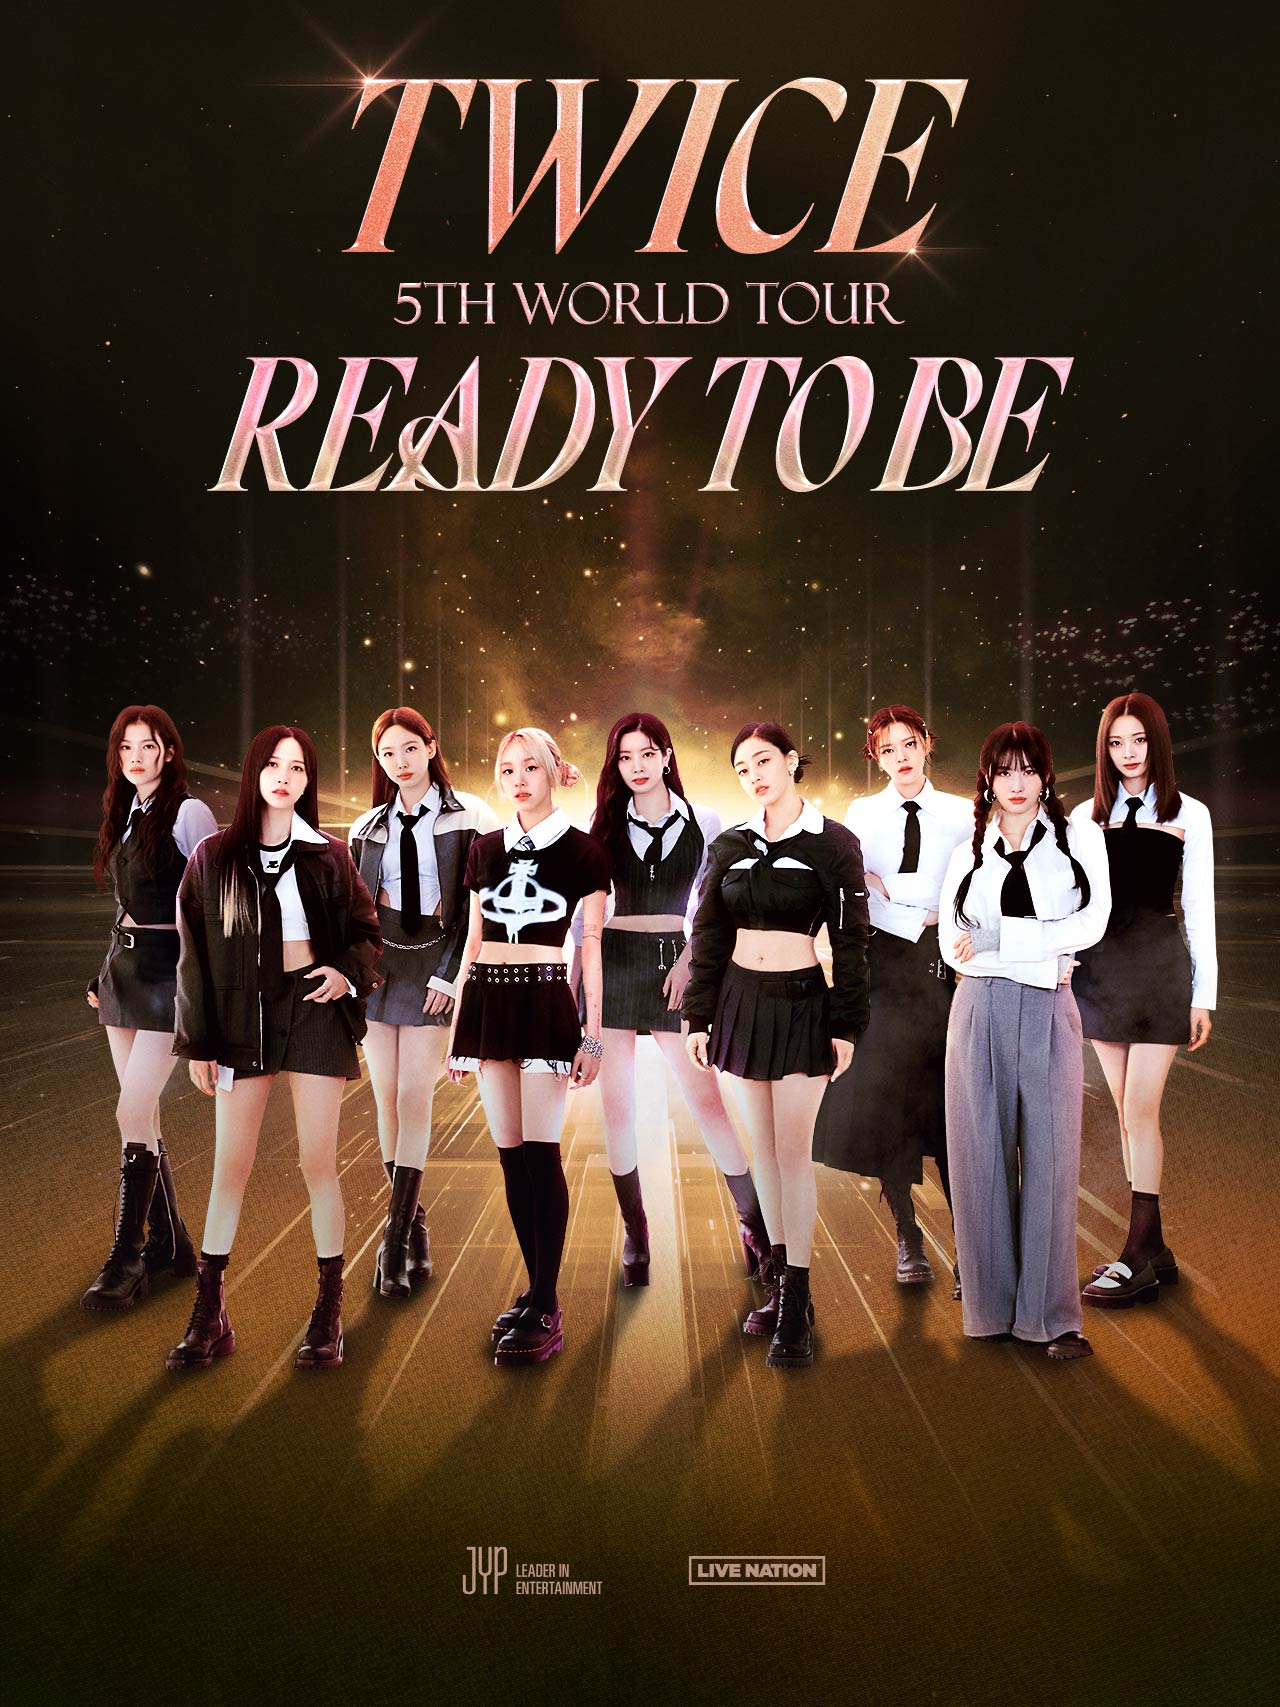 5th World Tour 'Ready To Be'